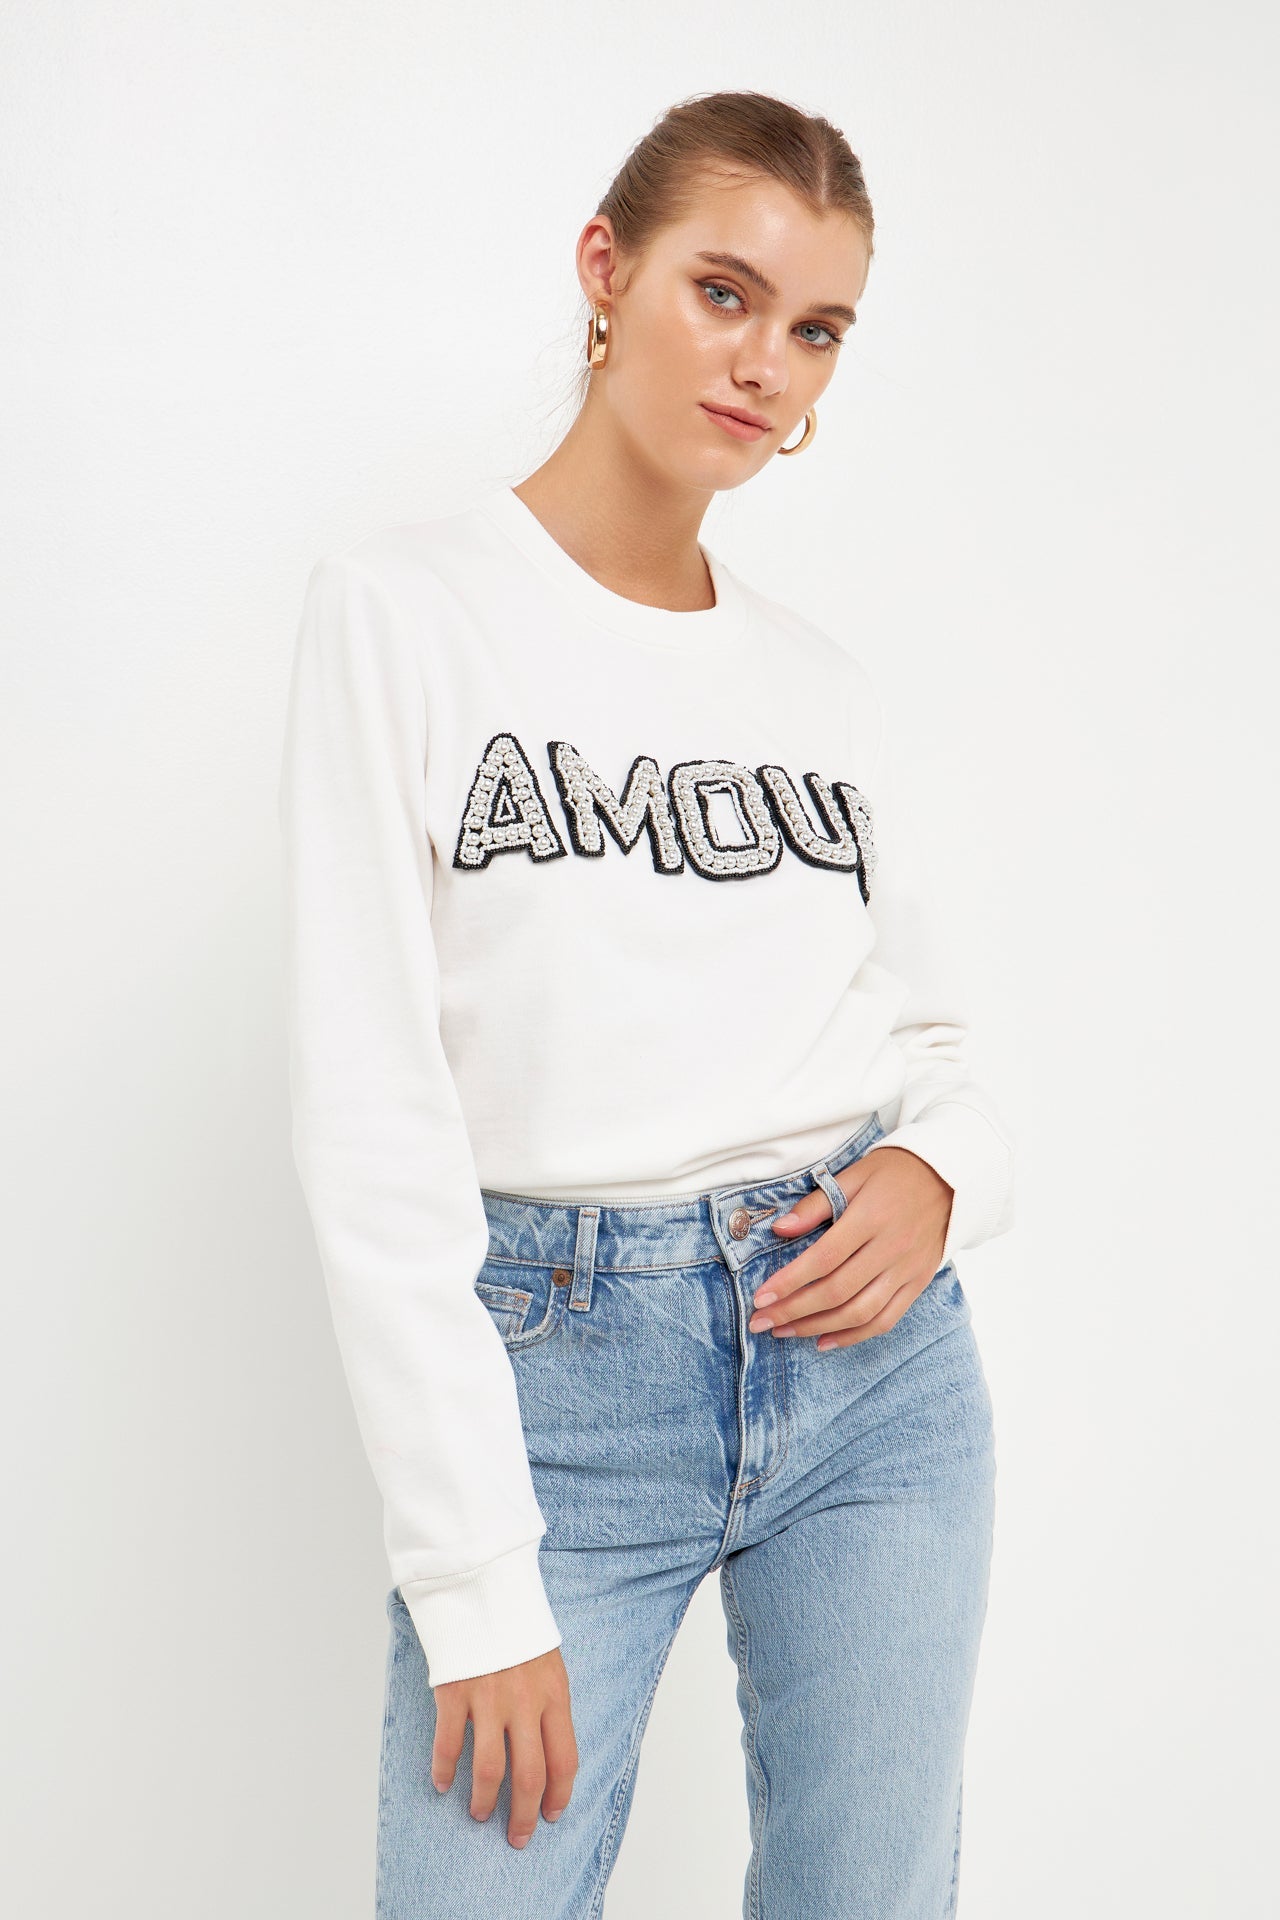 Endless Rose Amour Sweatshirt (50% off) - Comparable value $80